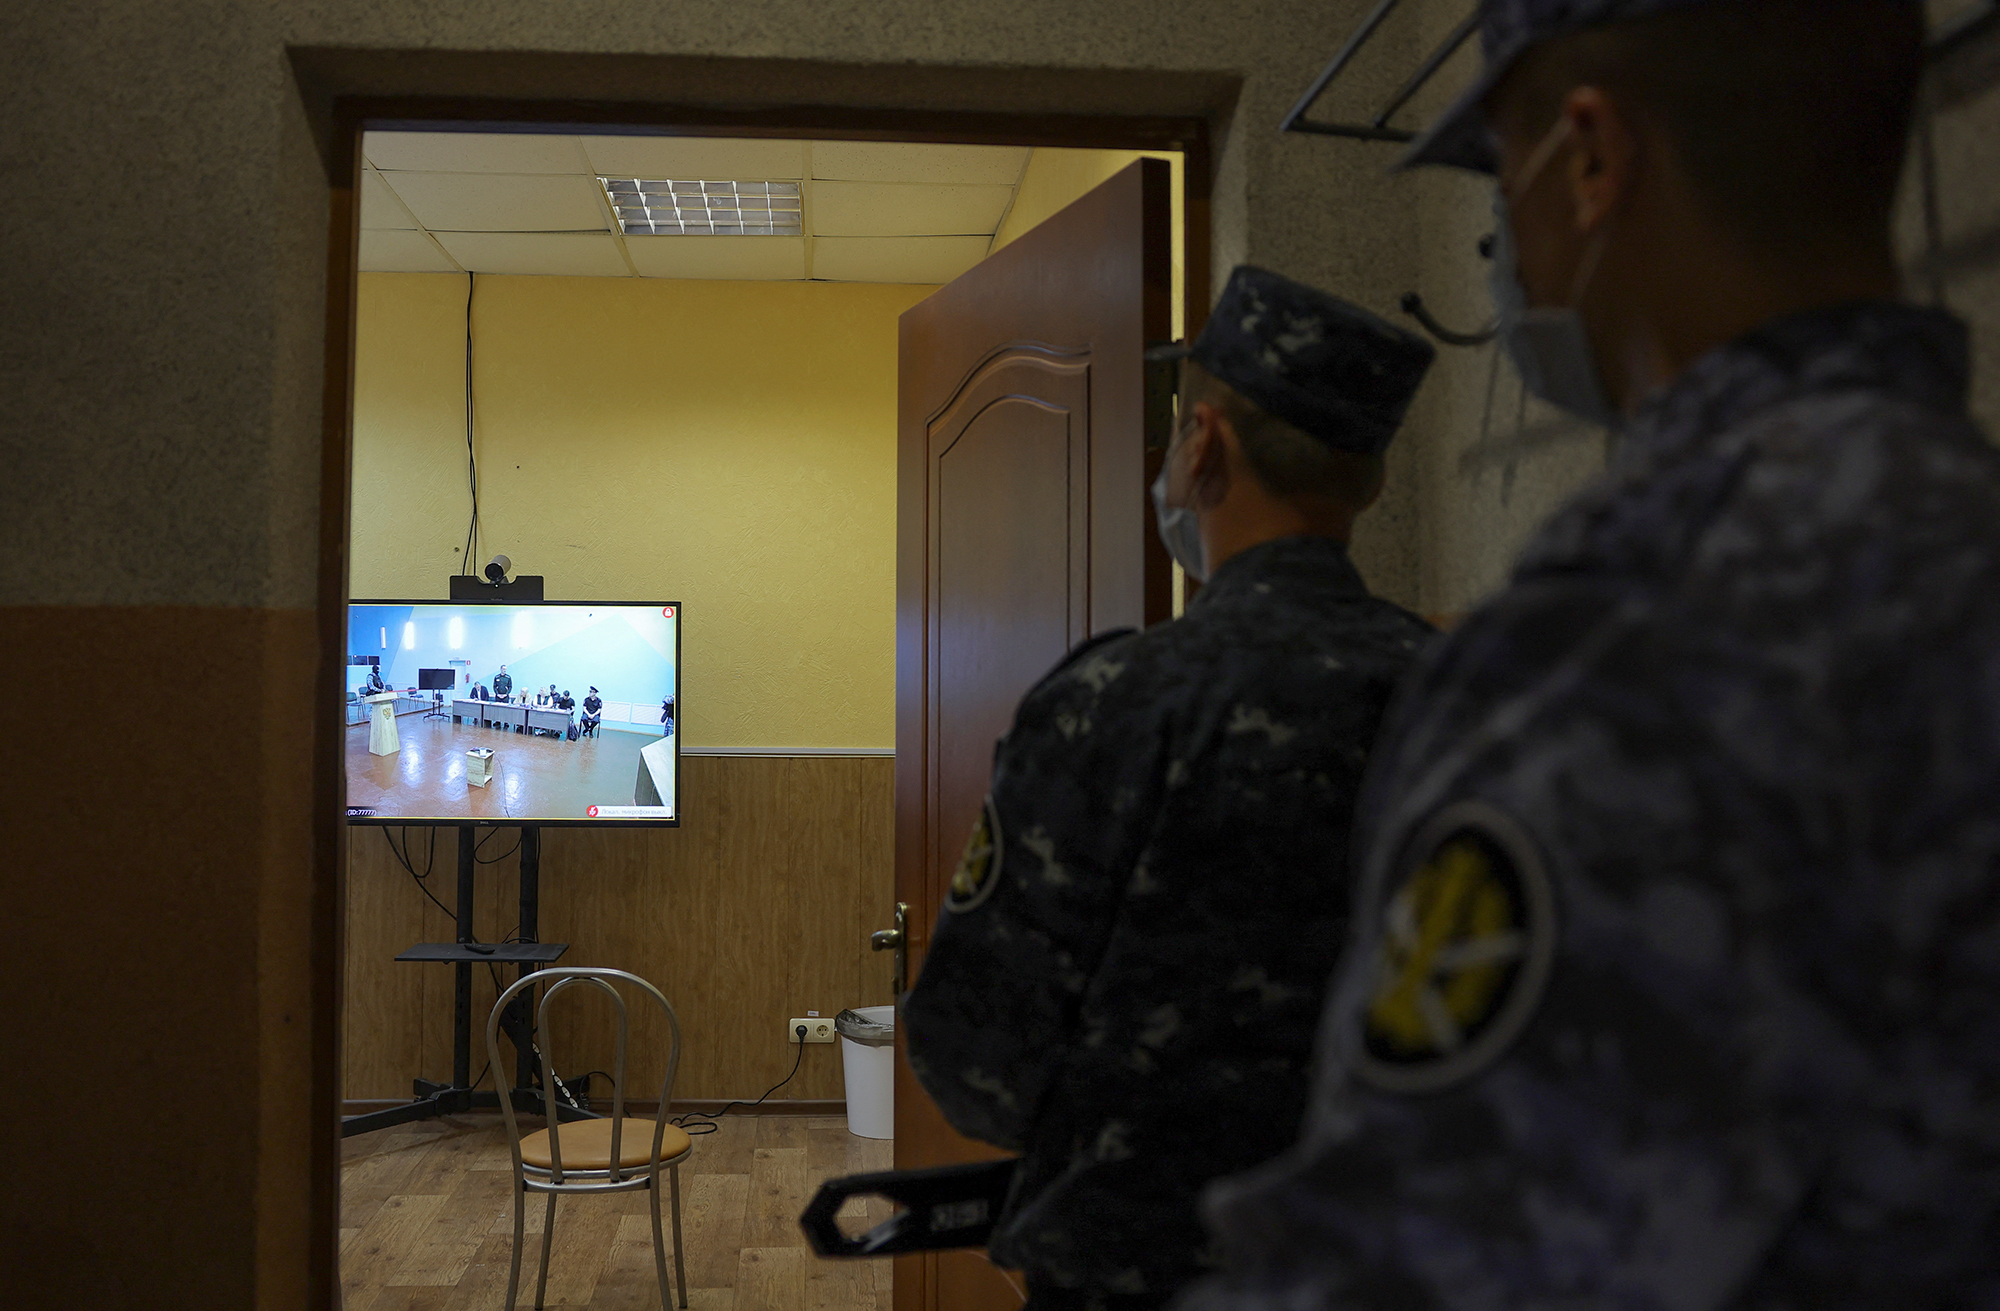 Law enforcement officers look at a screen during a video link to an external hearing of the Moscow City Court in a new criminal case against Russian opposition politician Alexey Navalny, at IK-6 penal colony in the Vladimir region, Russia, on June 19.